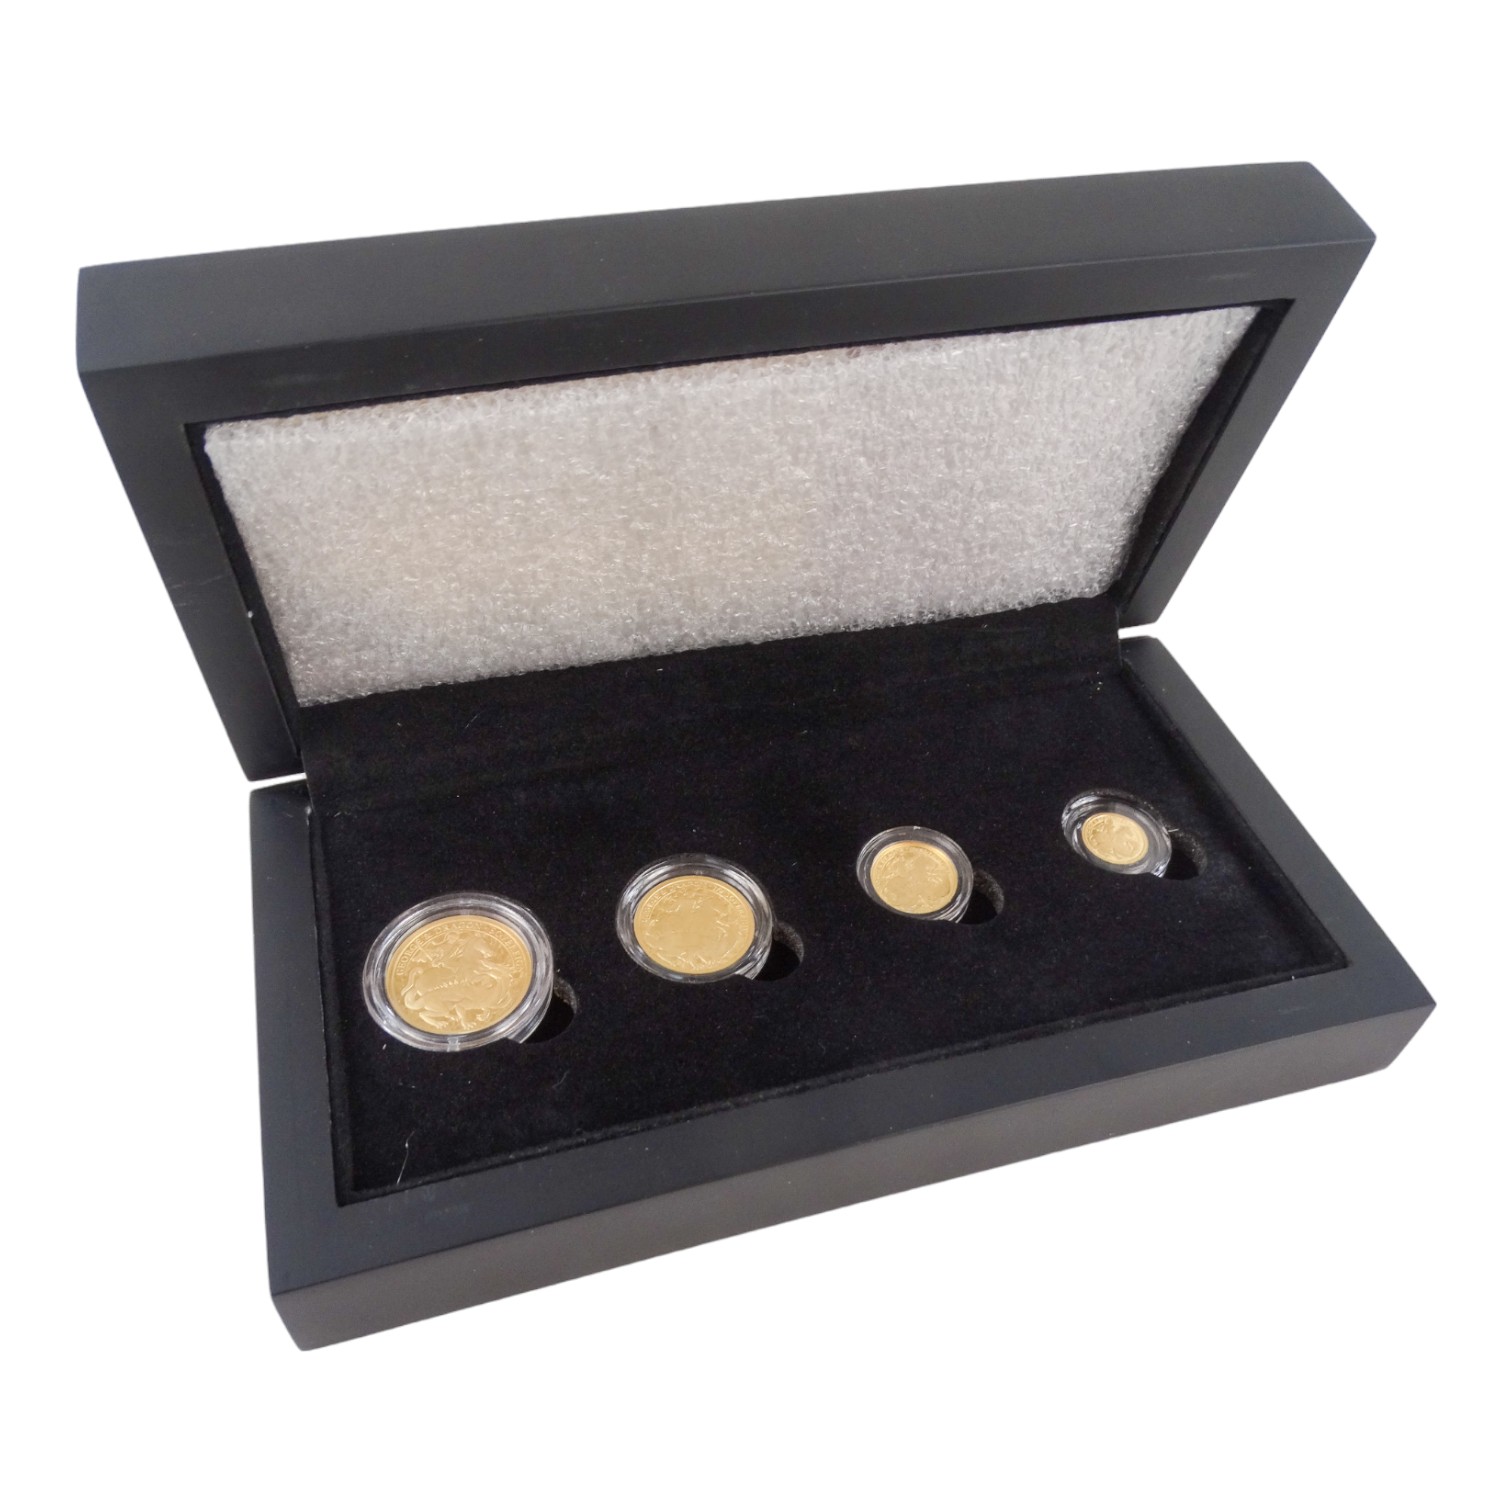 Hattons of London commemorative set of gold coins - 2021 200th anniversary, comprising sovereign,